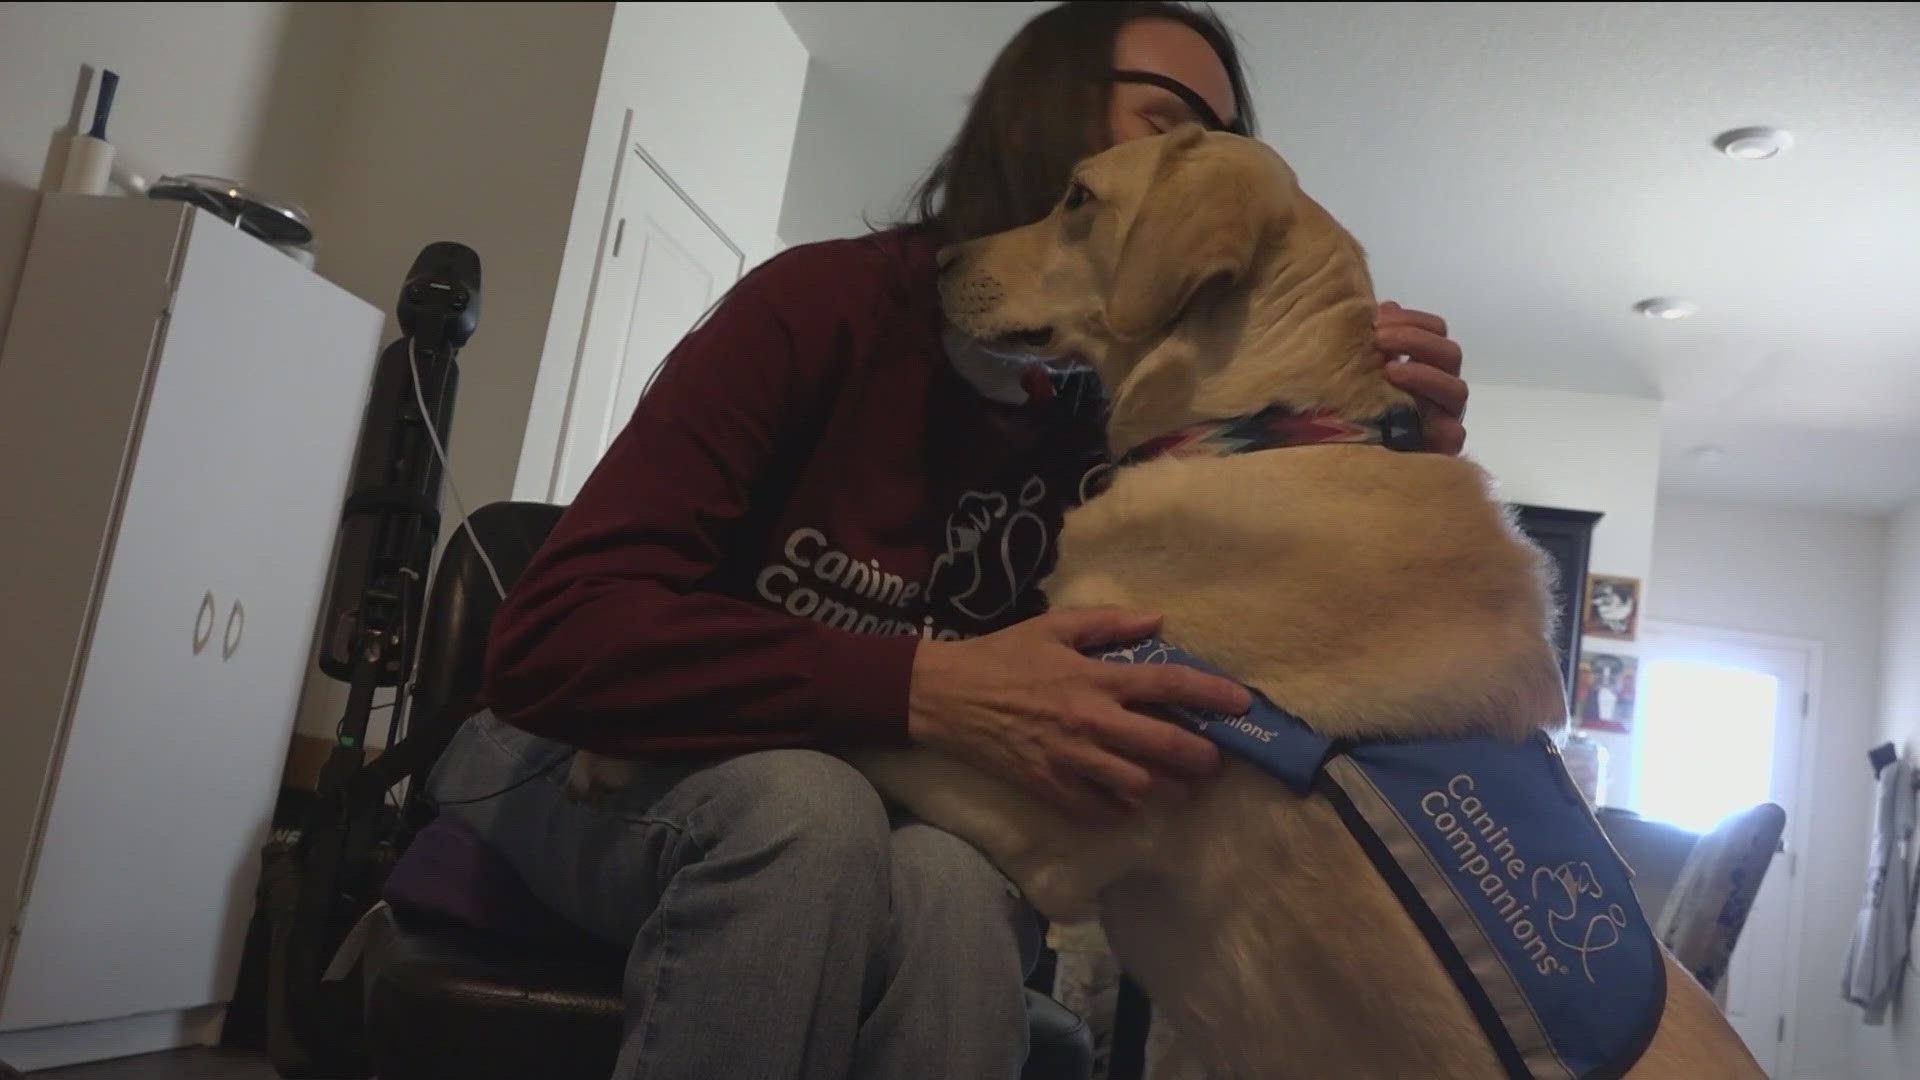 An unlikely companion made a disabled Central Texas woman realize she can still overcome her setbacks.